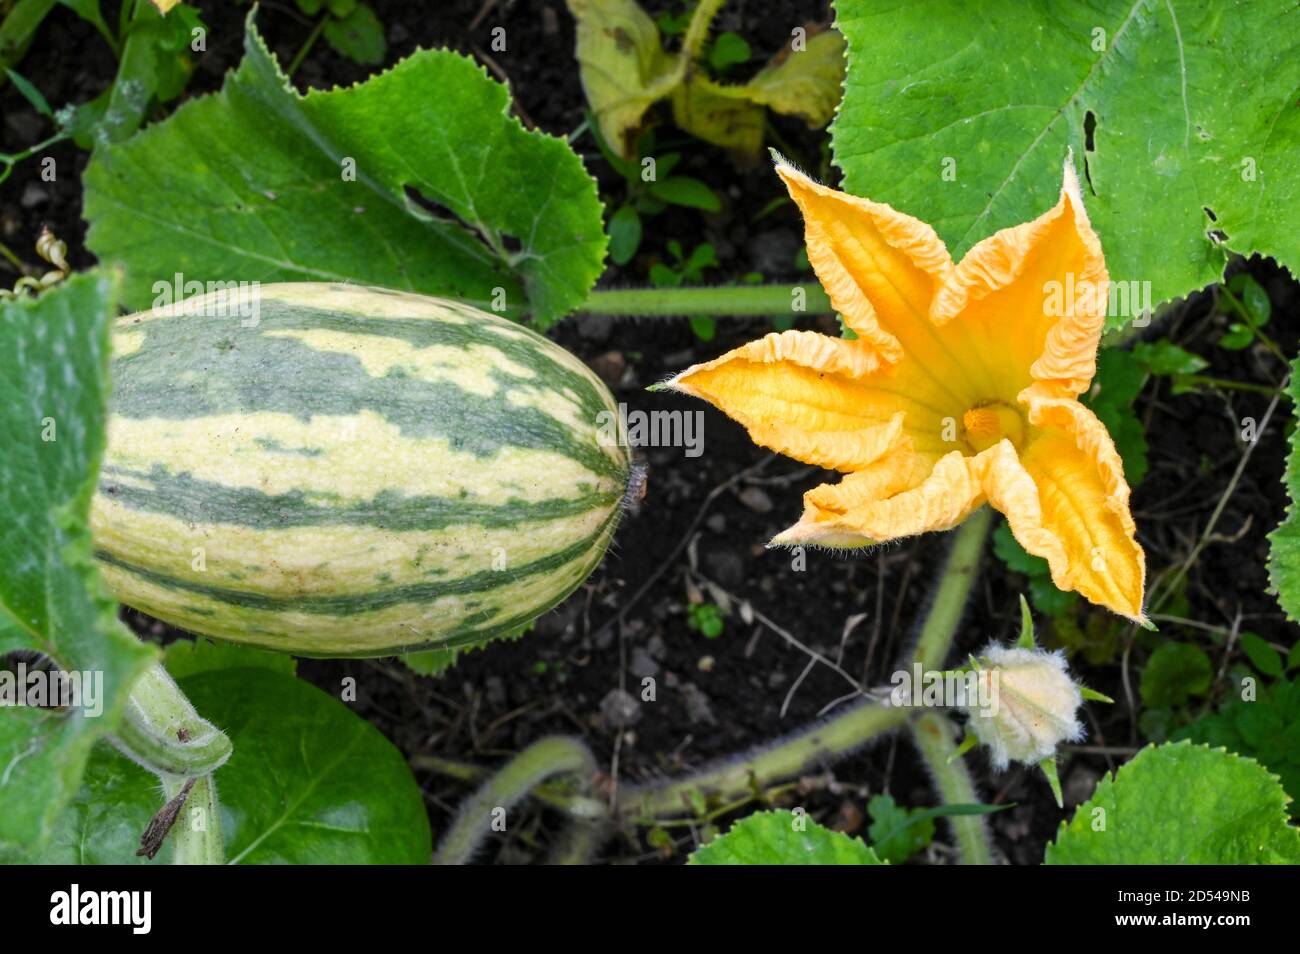 Honey Boat squash and flower growing naturally. Stock Photo